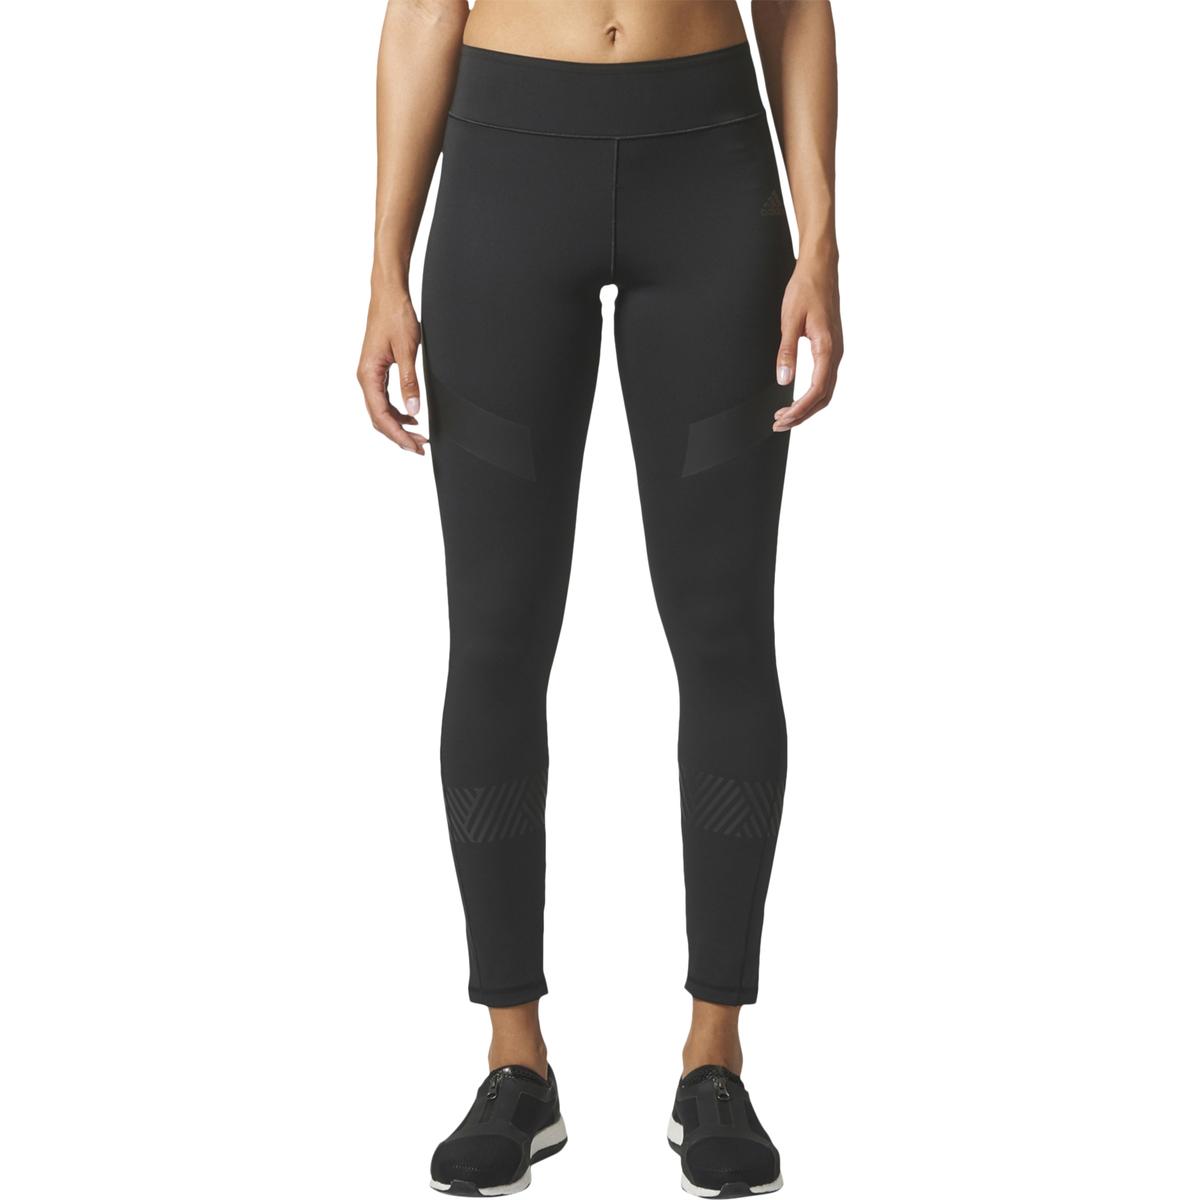 Adidas Womens Compression Fitness Athletic Tights